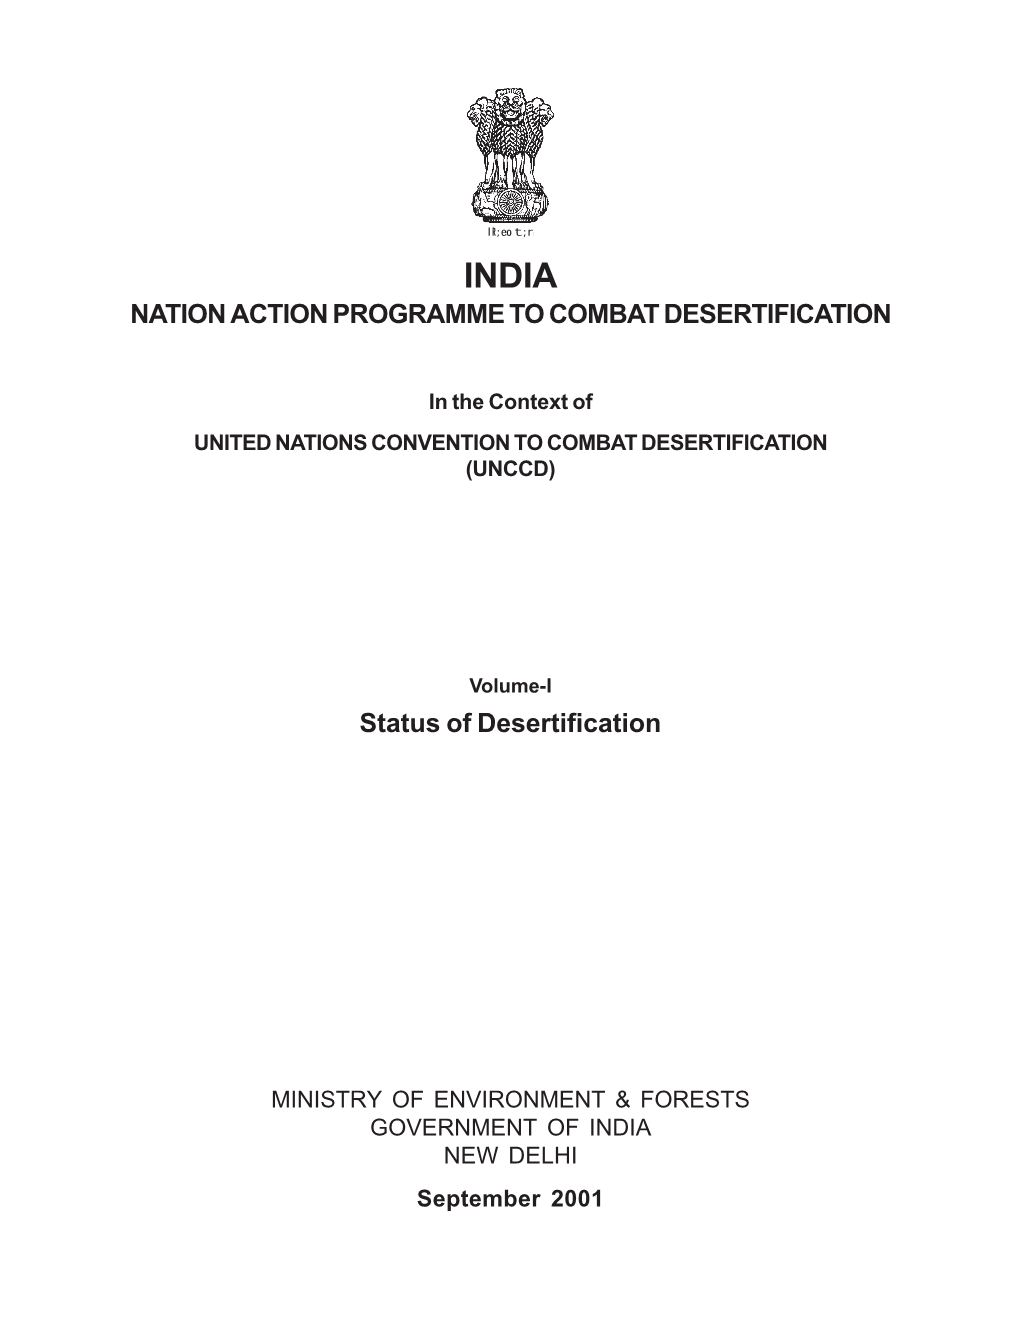 India Nation Action Programme to Combat Desertification